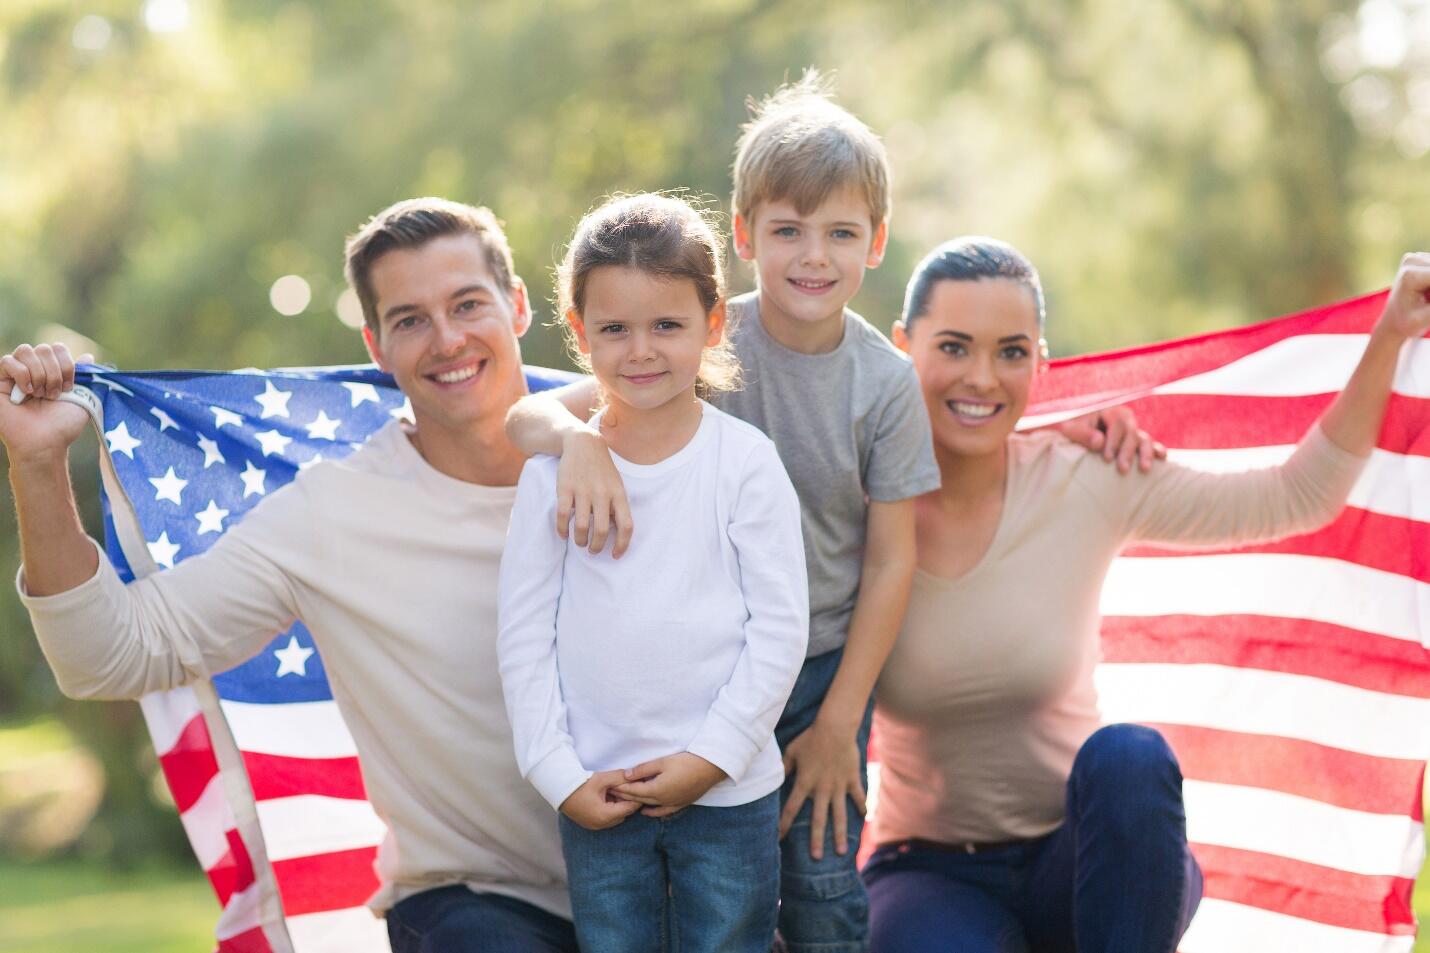 The United States has many different types of families